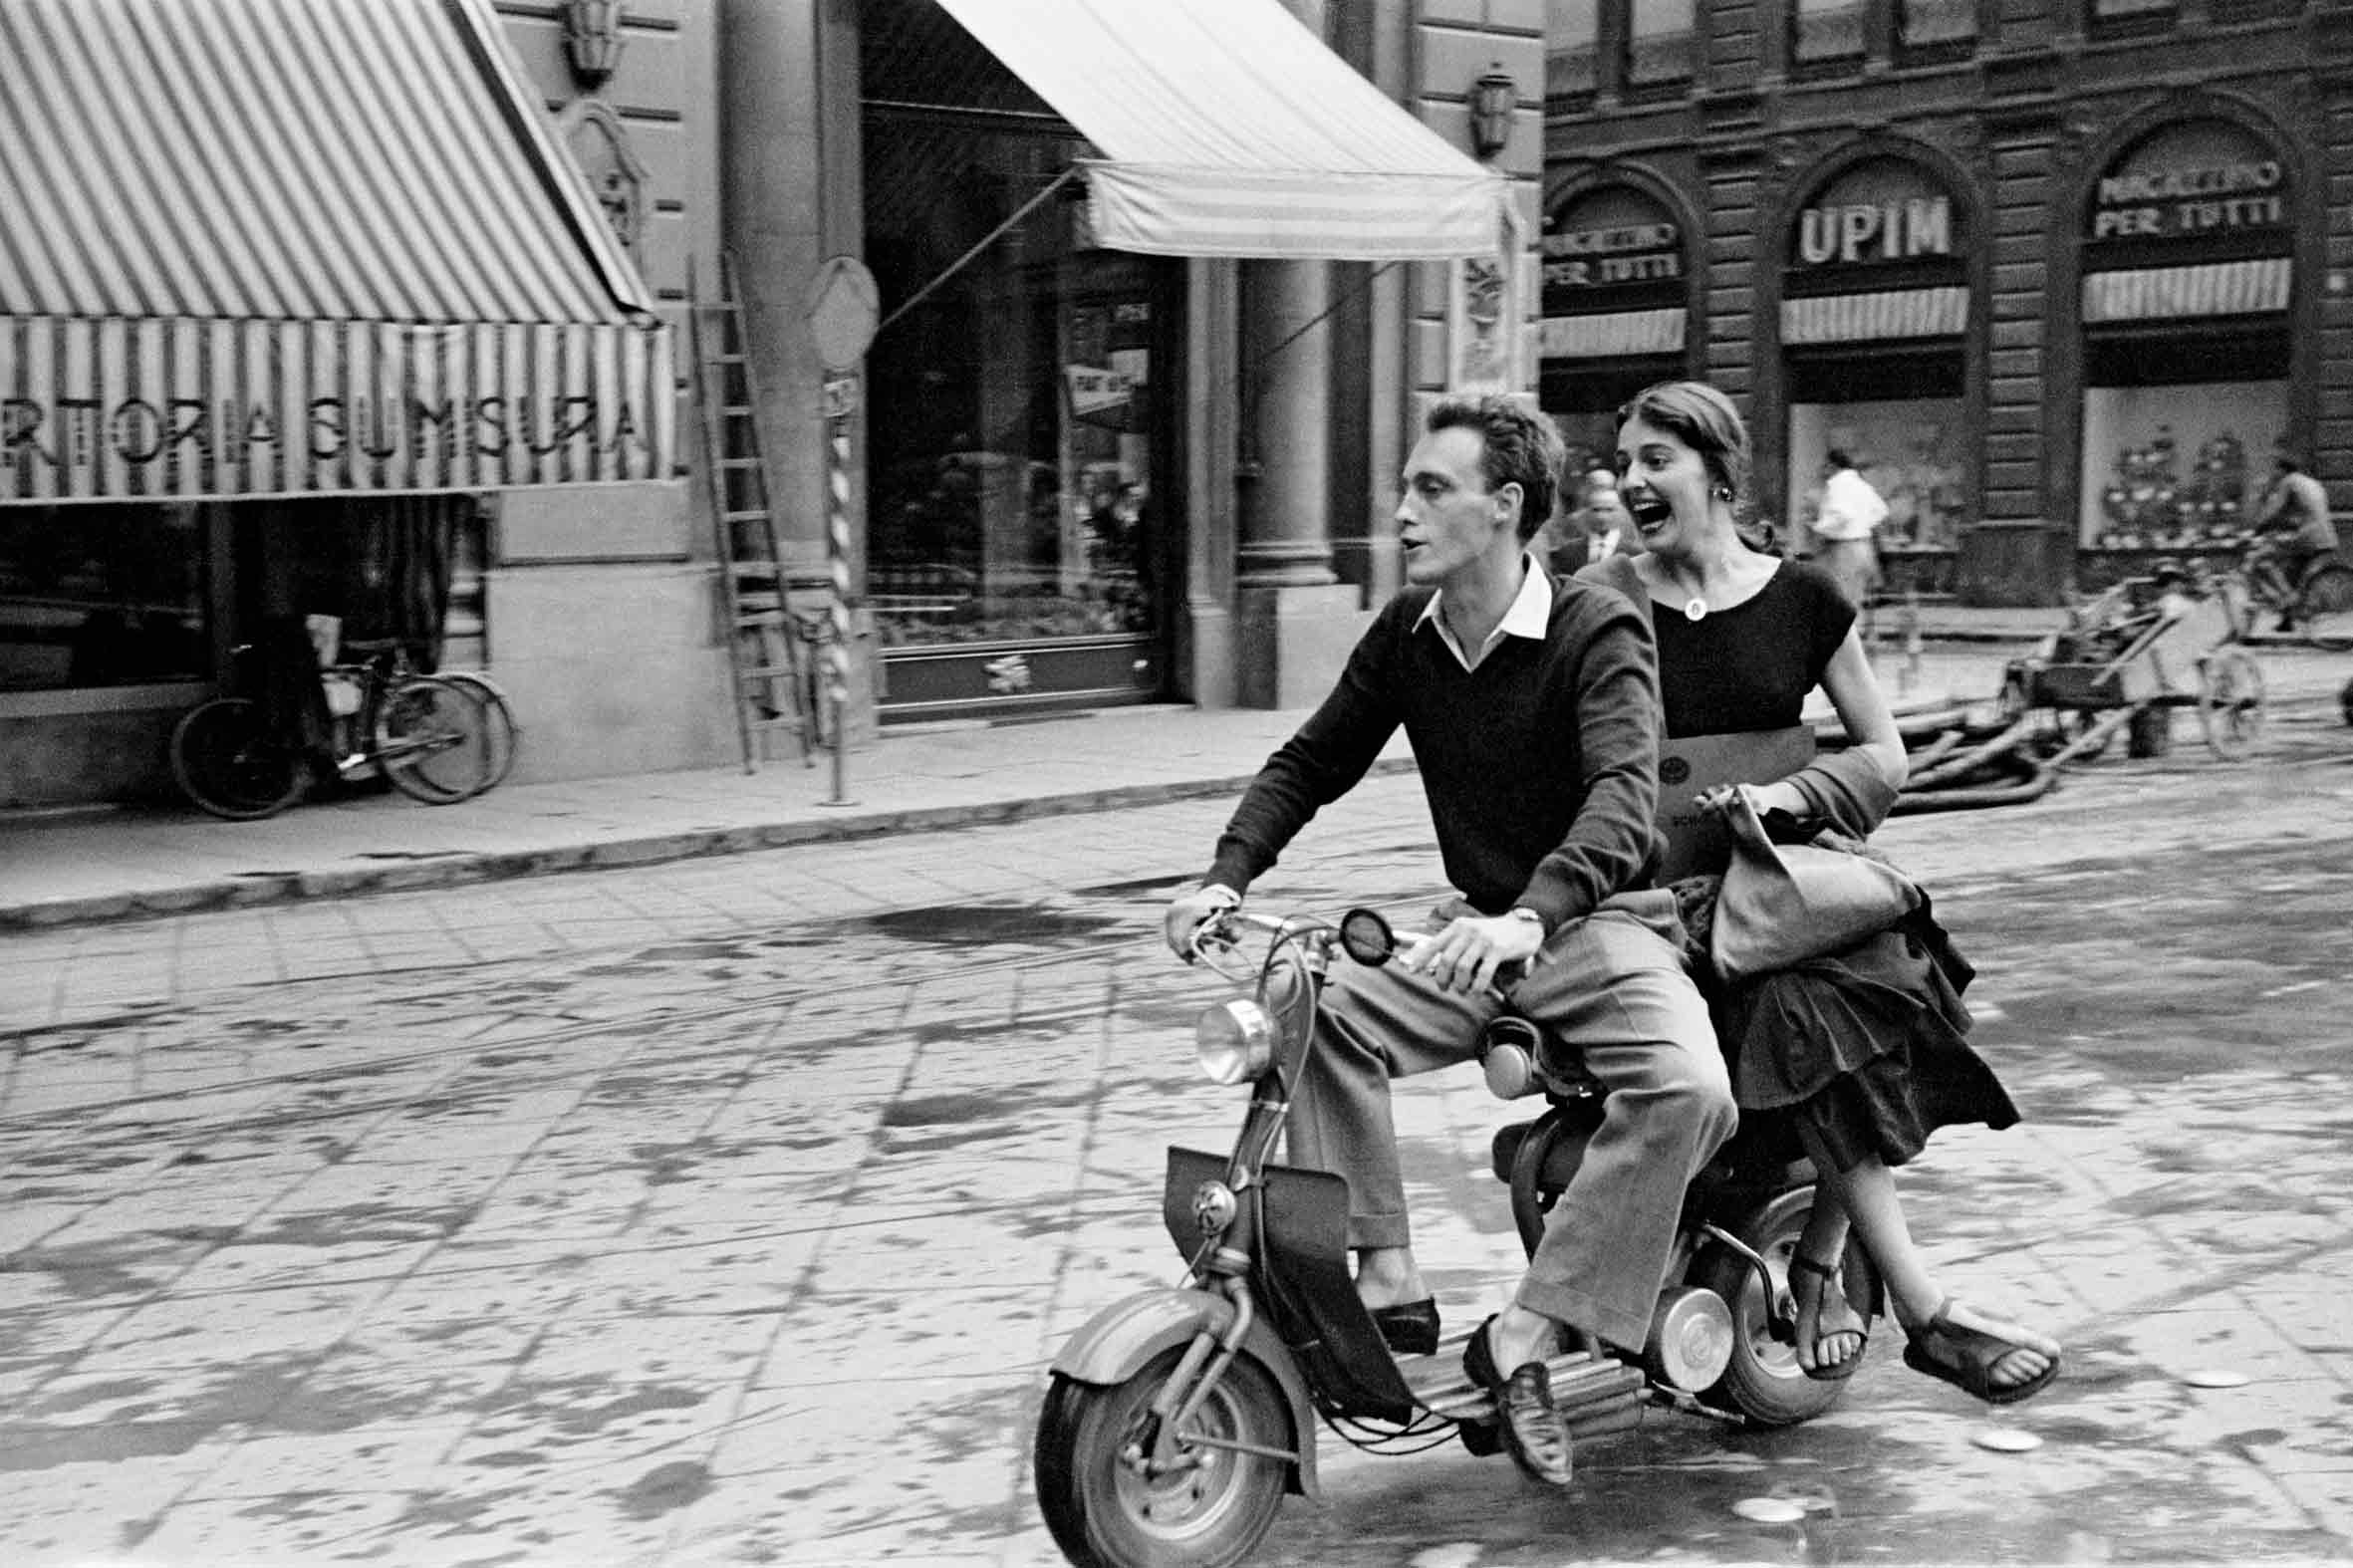 Jinx and Justin on Scooter, Firenze, Italia (1951)